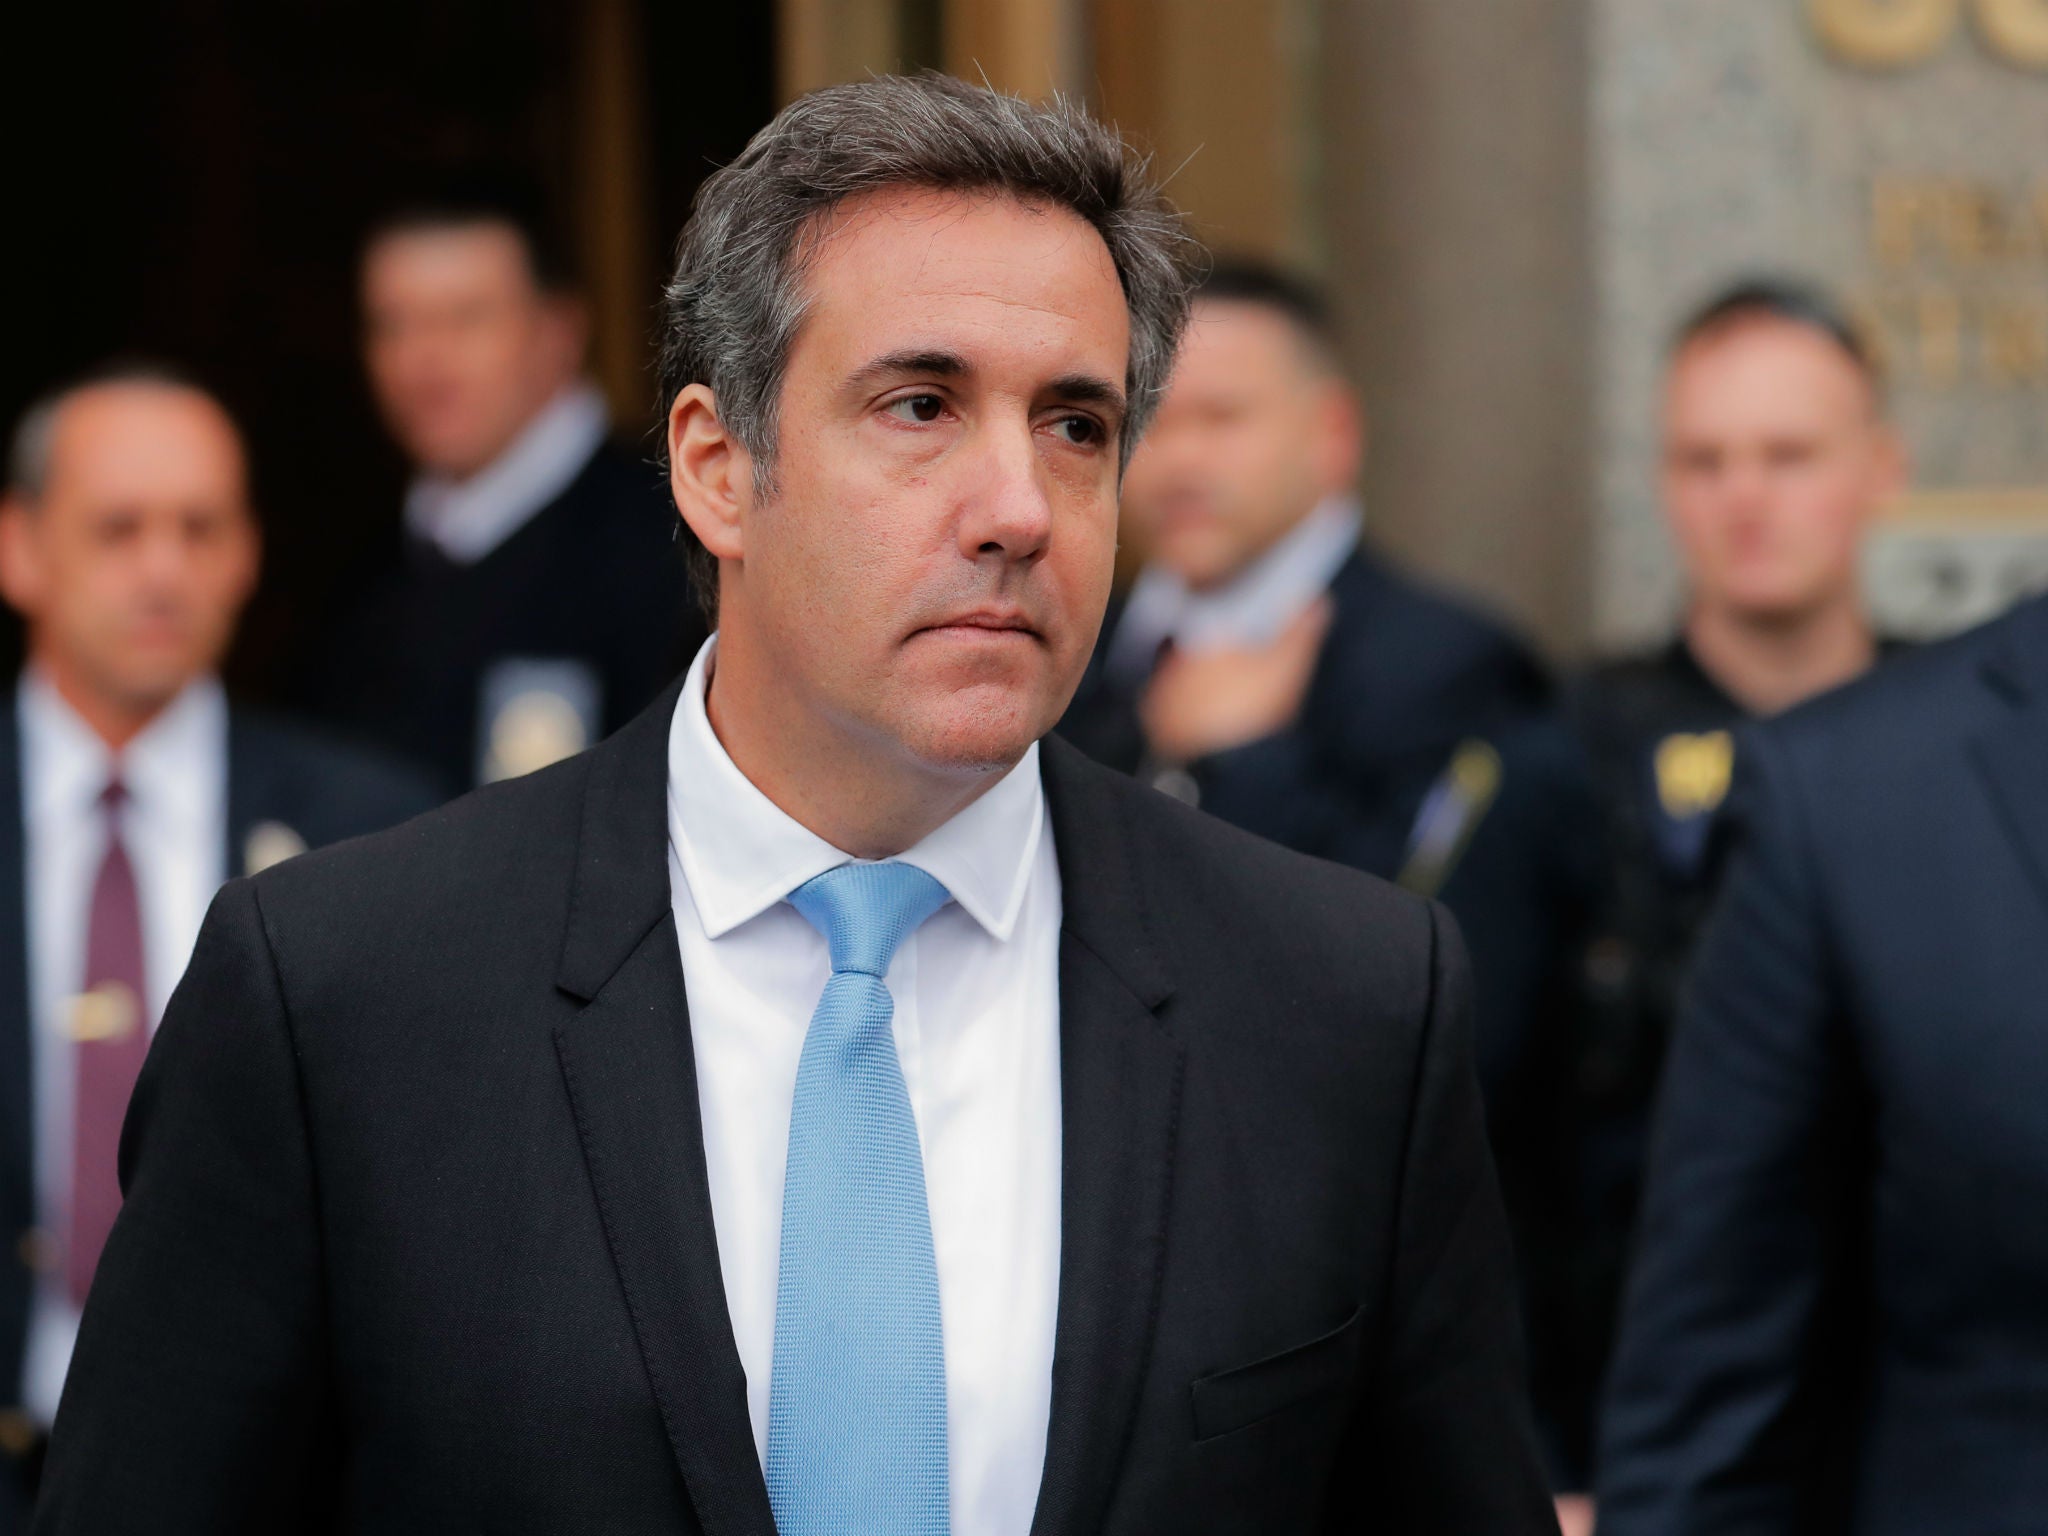 Michael Cohen leaves federal court in Manhattan